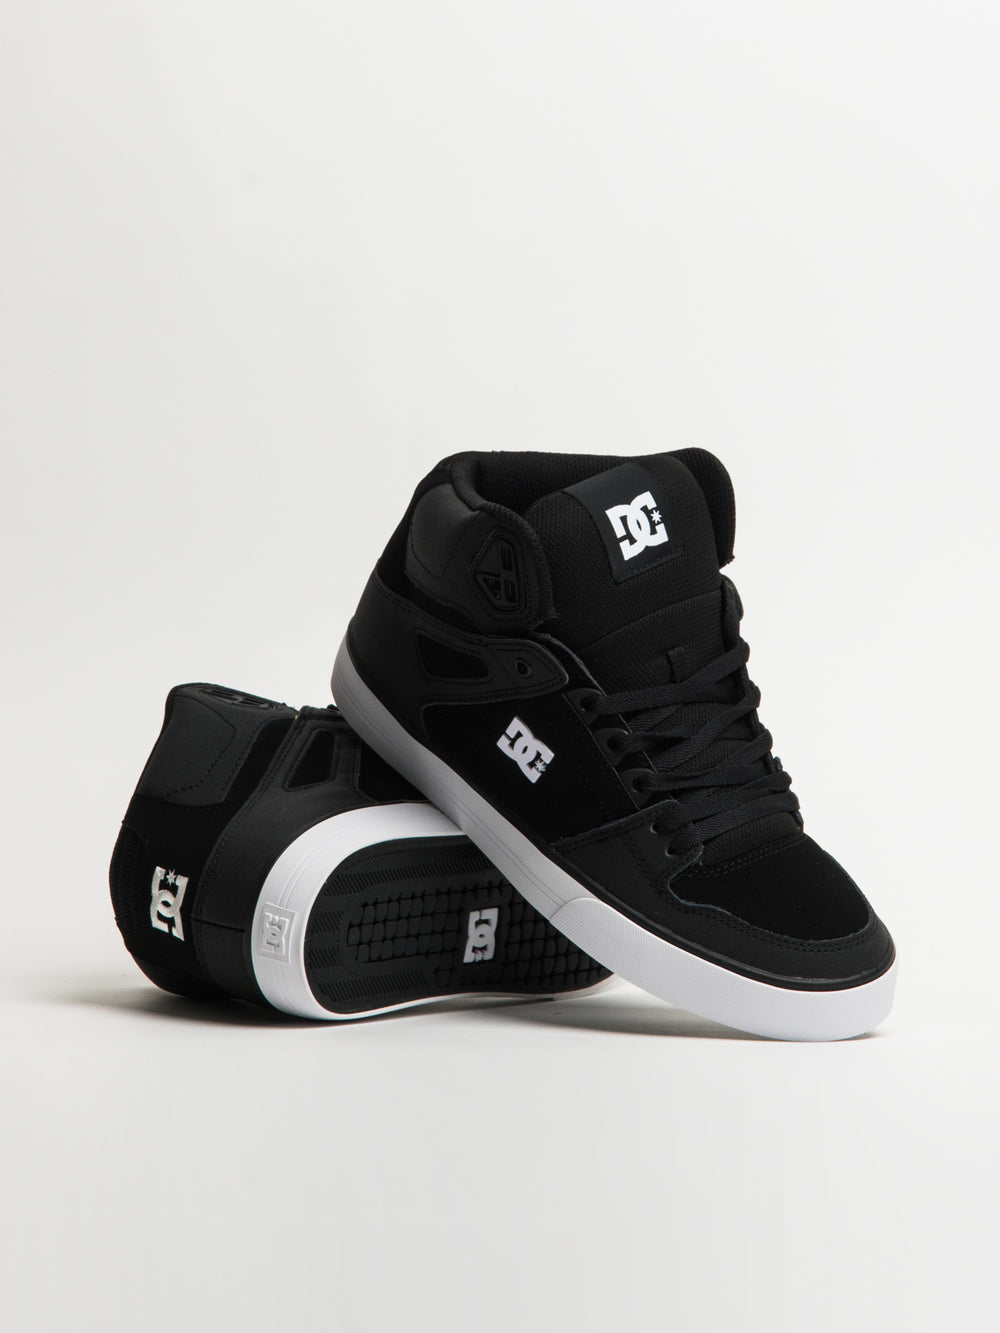 MENS DC SHOES PURE HIGH TOP WC